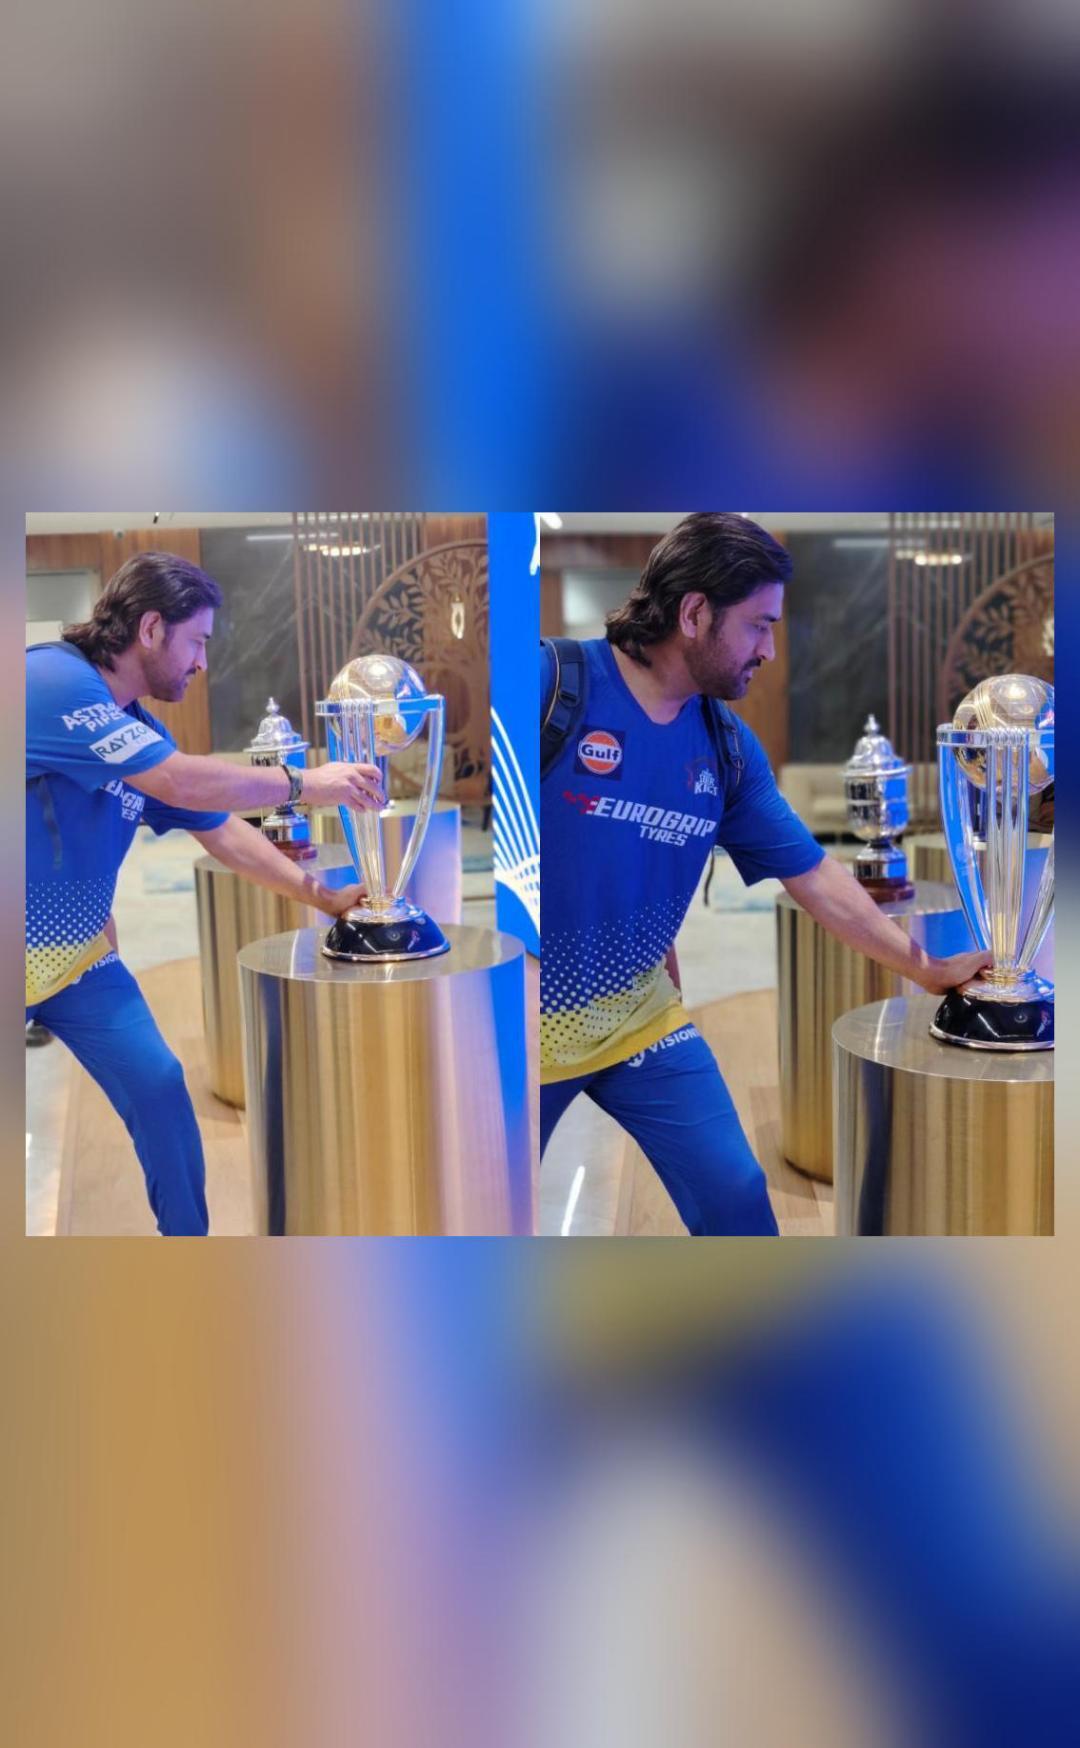 MS Dhoni visits BCCI headquarters, poses with World Cup 2011 trophy | Dhoni is in Mumbai for CSK's match vs MI | Inshorts - Inshorts